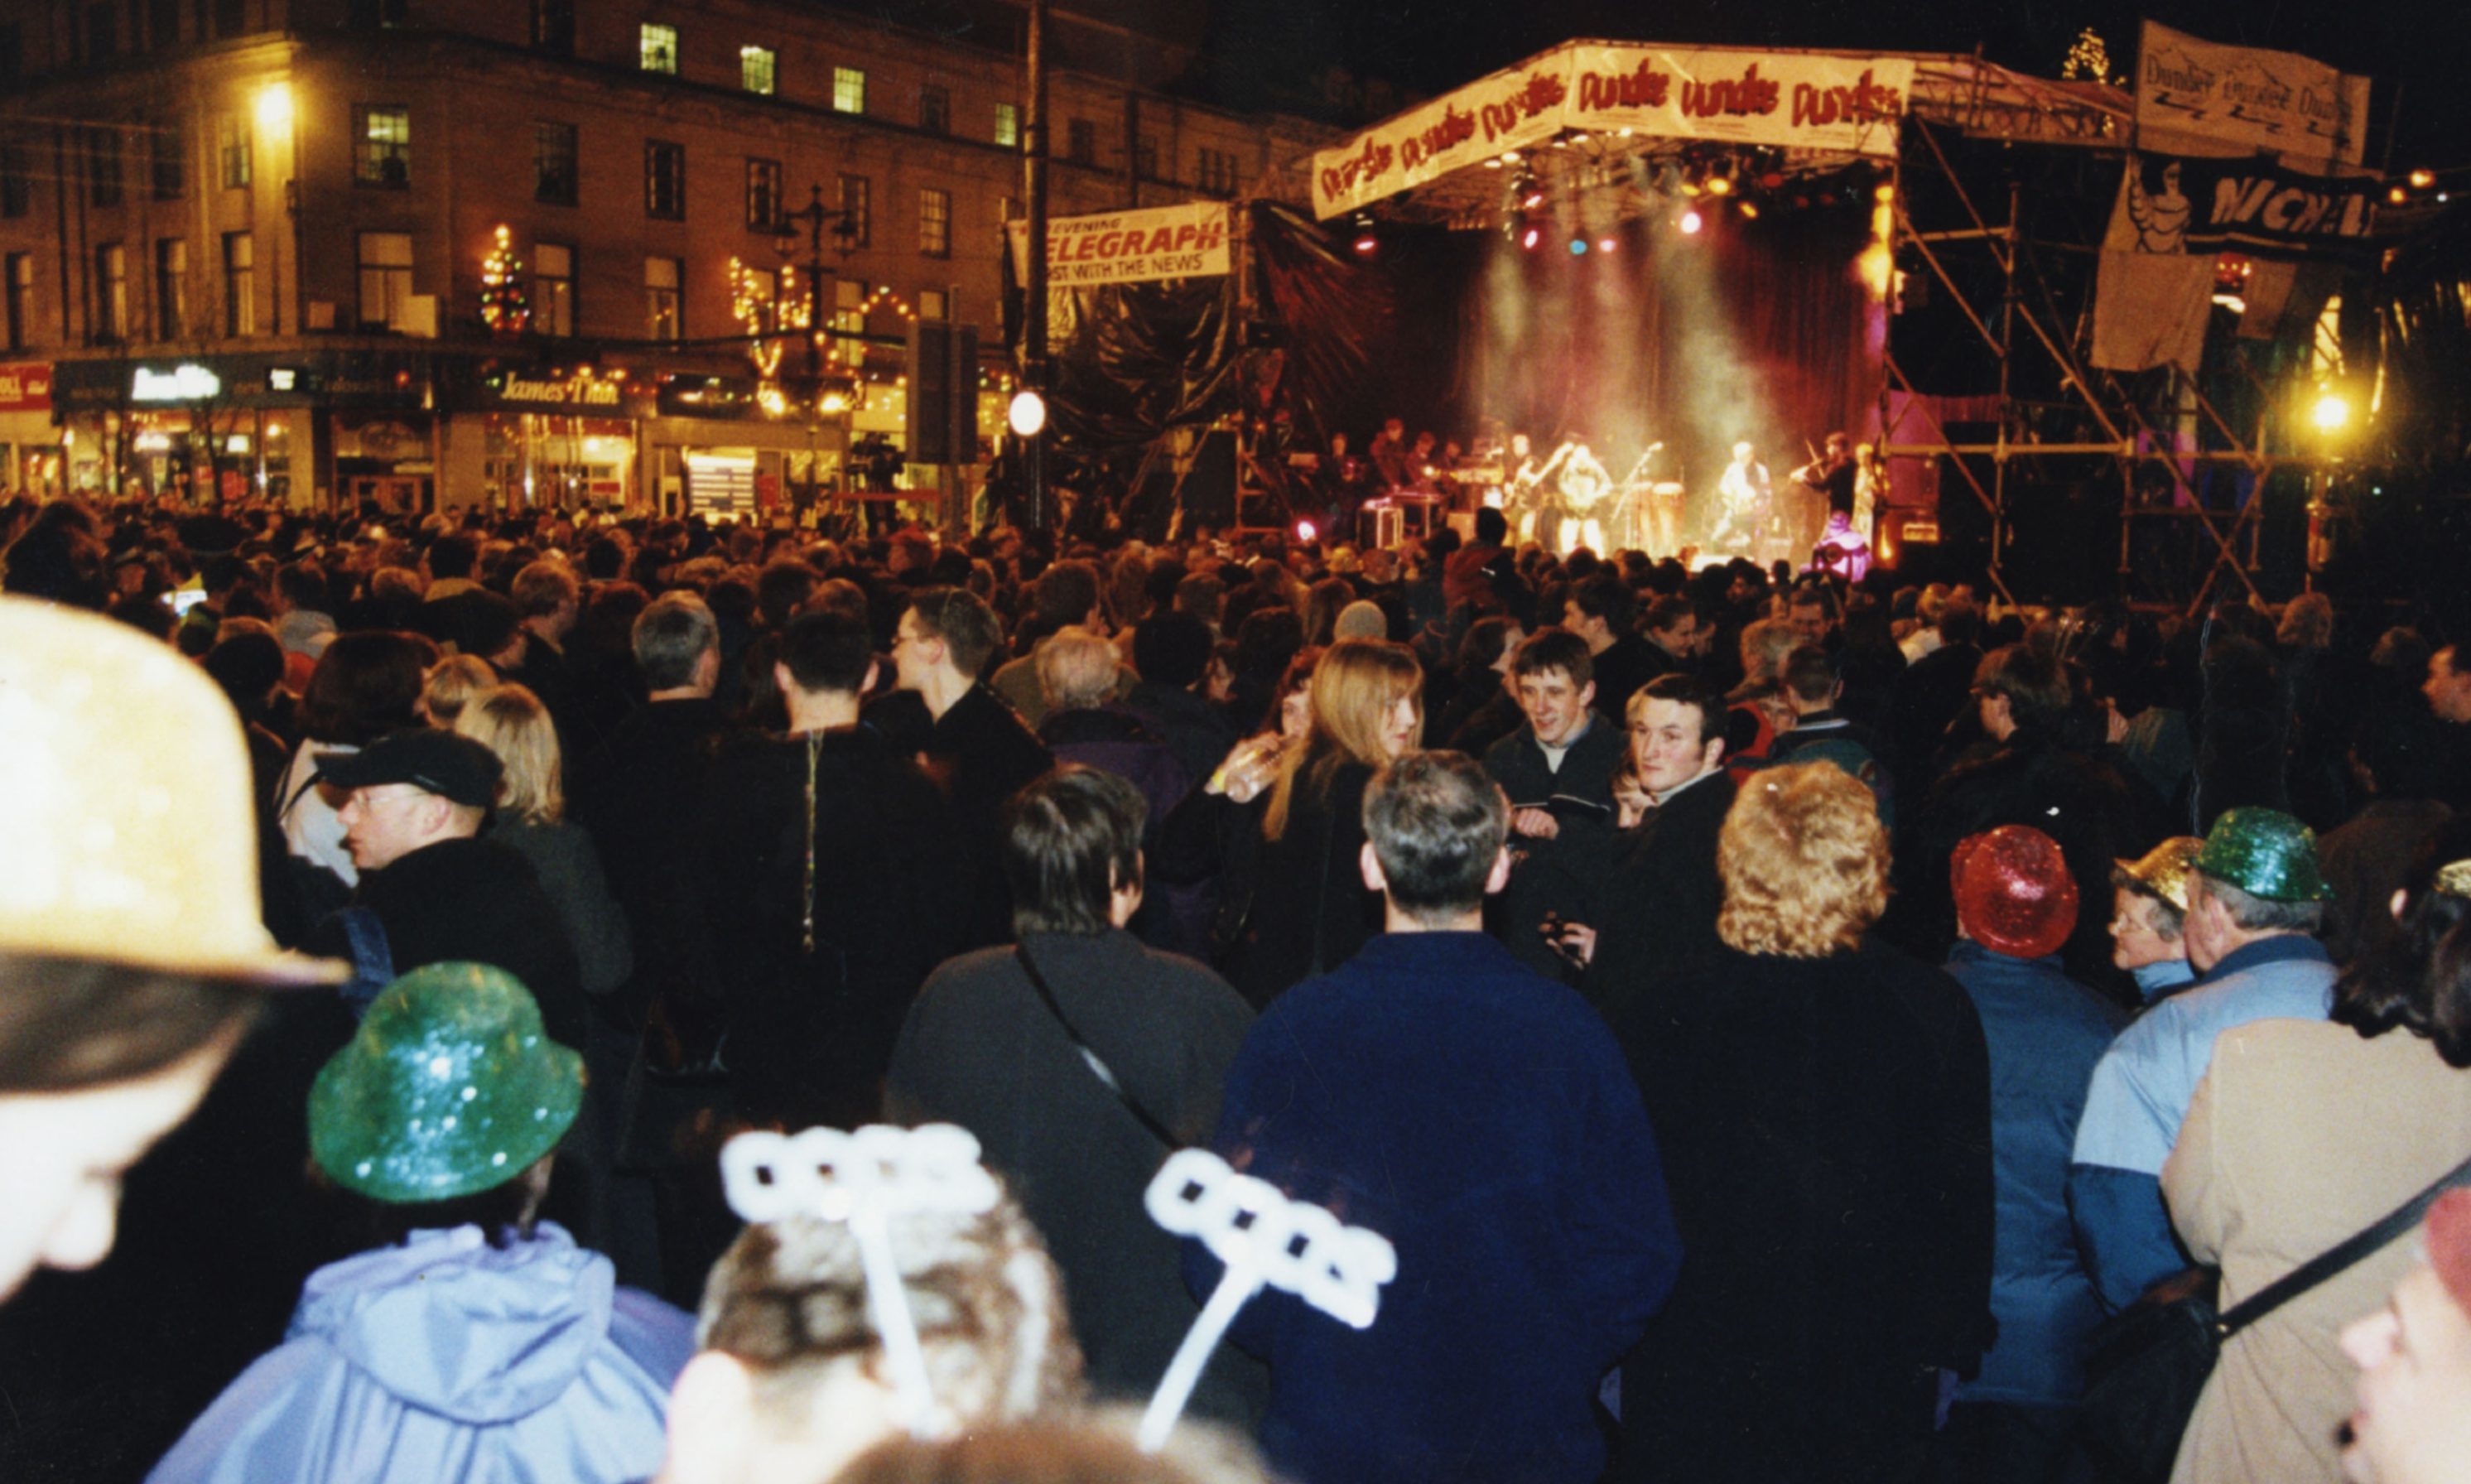 The New Year celebration in Dundee in 1999/2000.